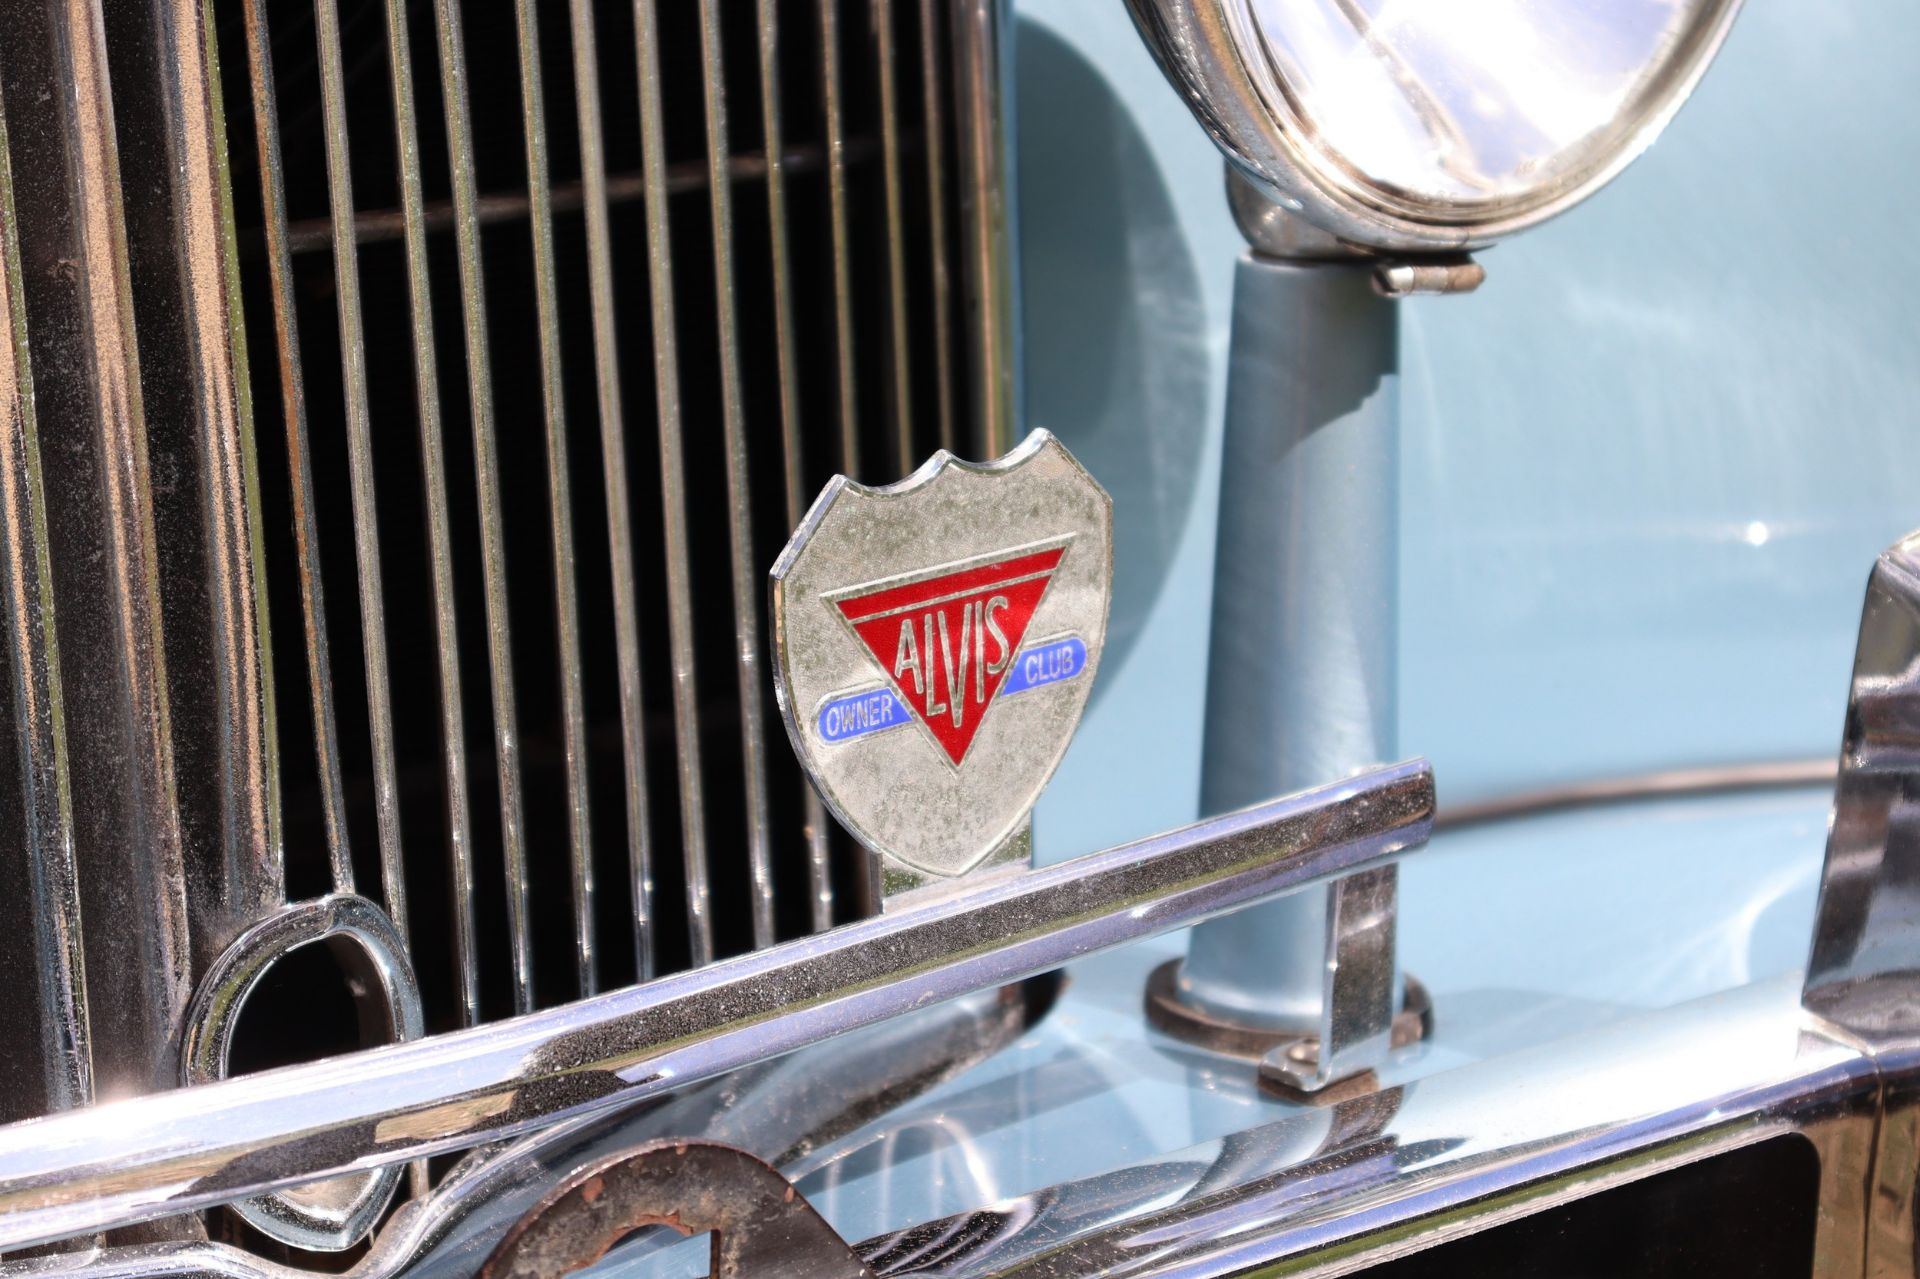 1952 ALVIS TA21 THREE-POSITION DROPHEAD COUPE Registration Number: HUJ 259 Chassis Number: 24489 - Image 33 of 44